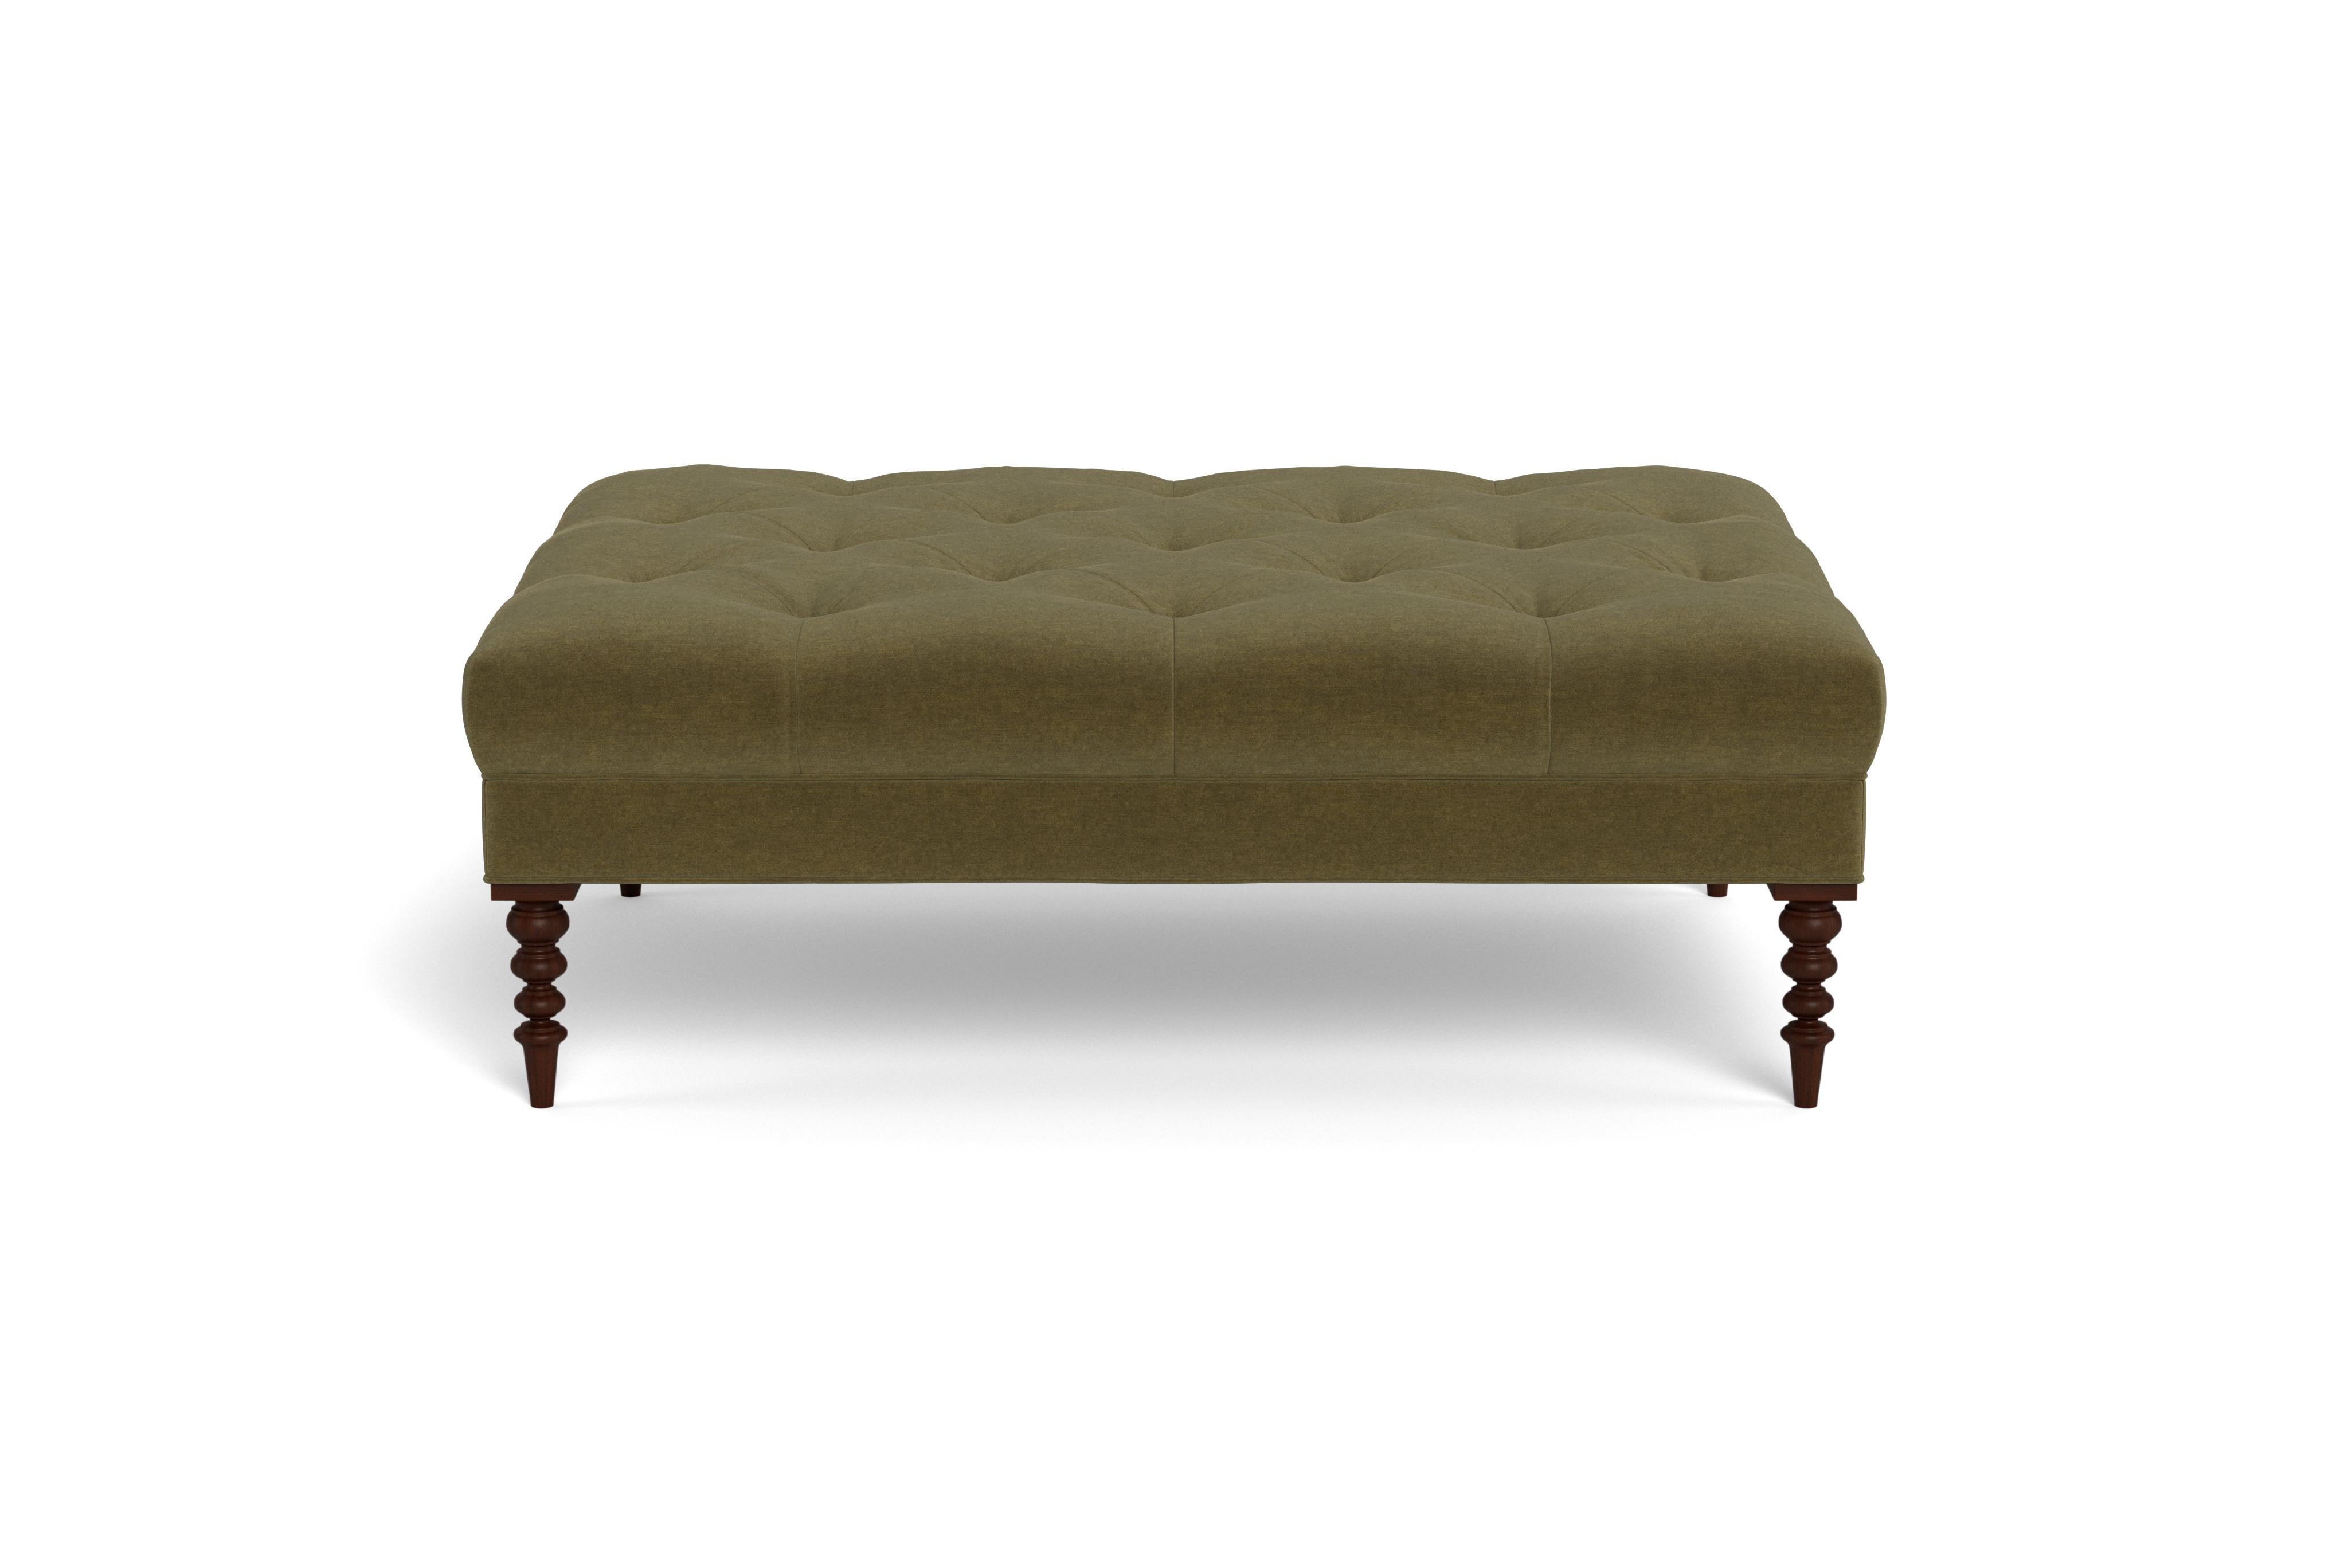 A large cocktail ottoman, with beautiful tufting set atop a trim upholstered box, with wonderfully turned legs. Made to order in a neutral olive velvet, a fabric able to be cleaned and used in high traffic areas.  Legs finished in mahogany.  Returns